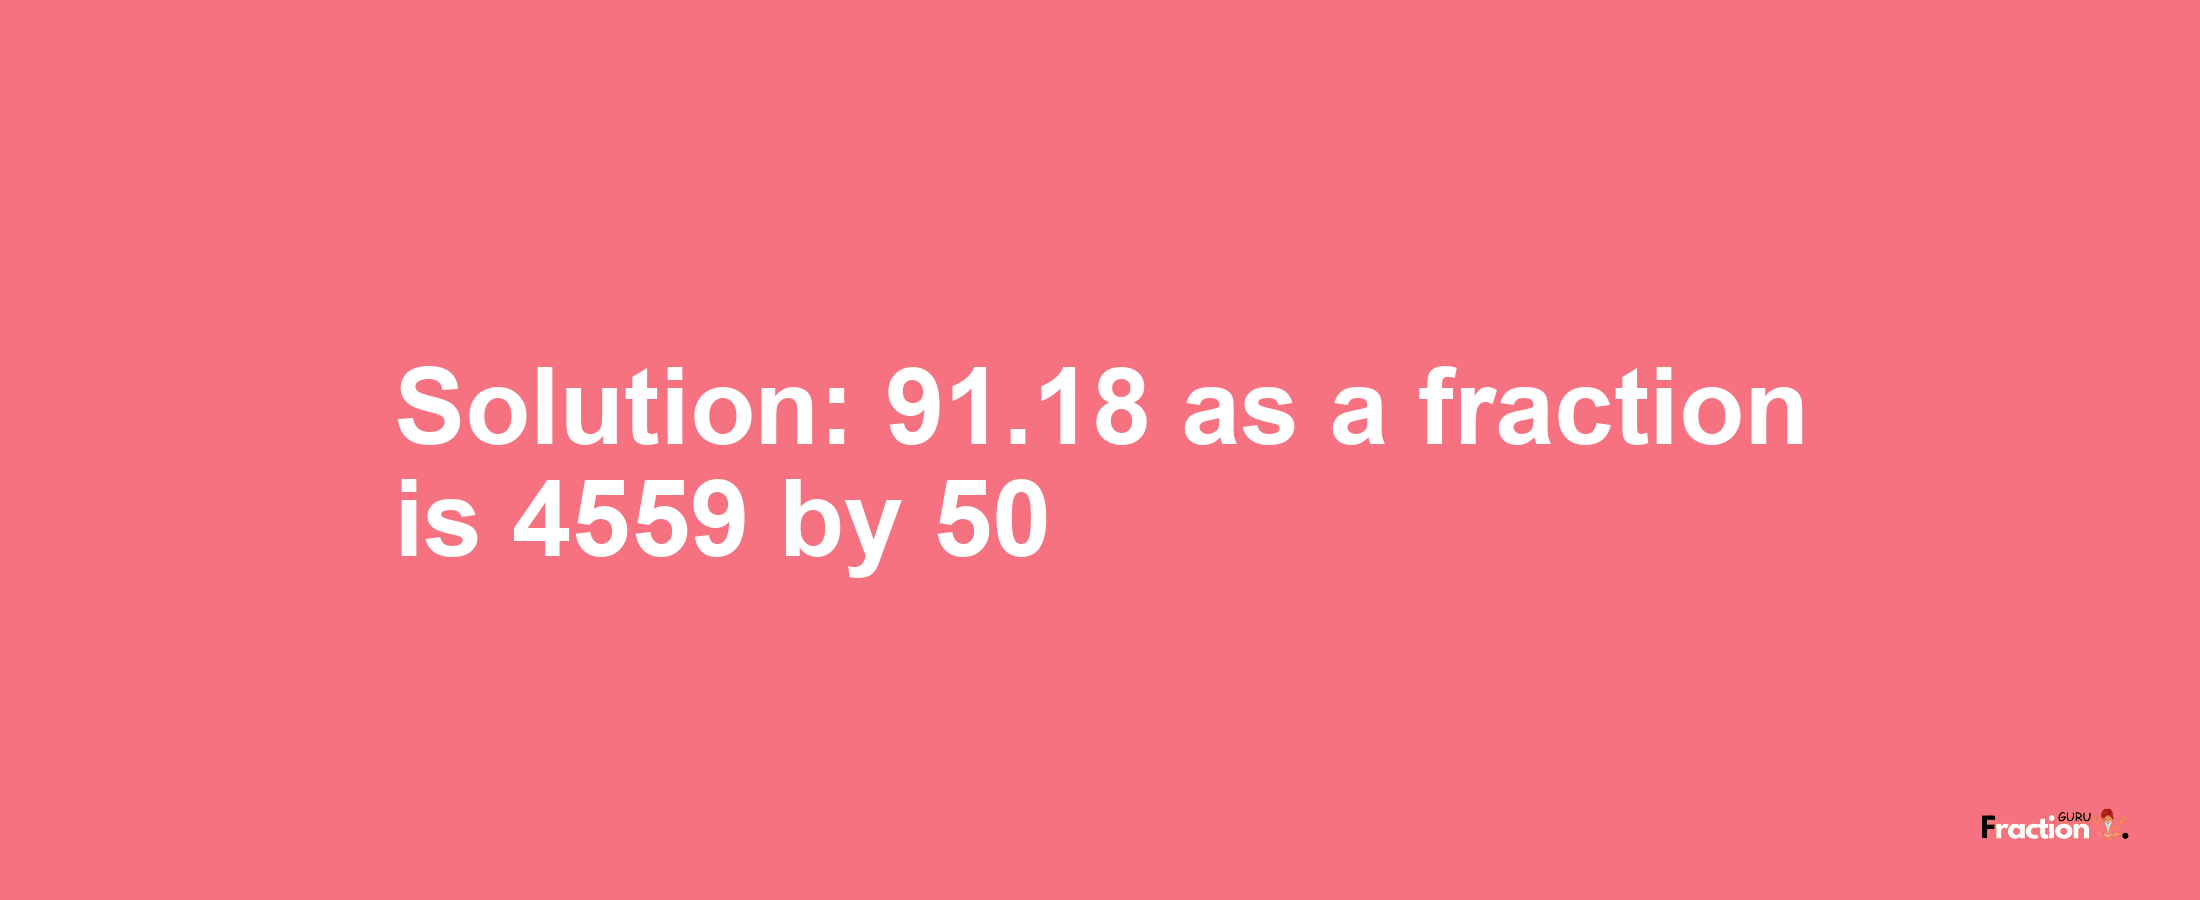 Solution:91.18 as a fraction is 4559/50